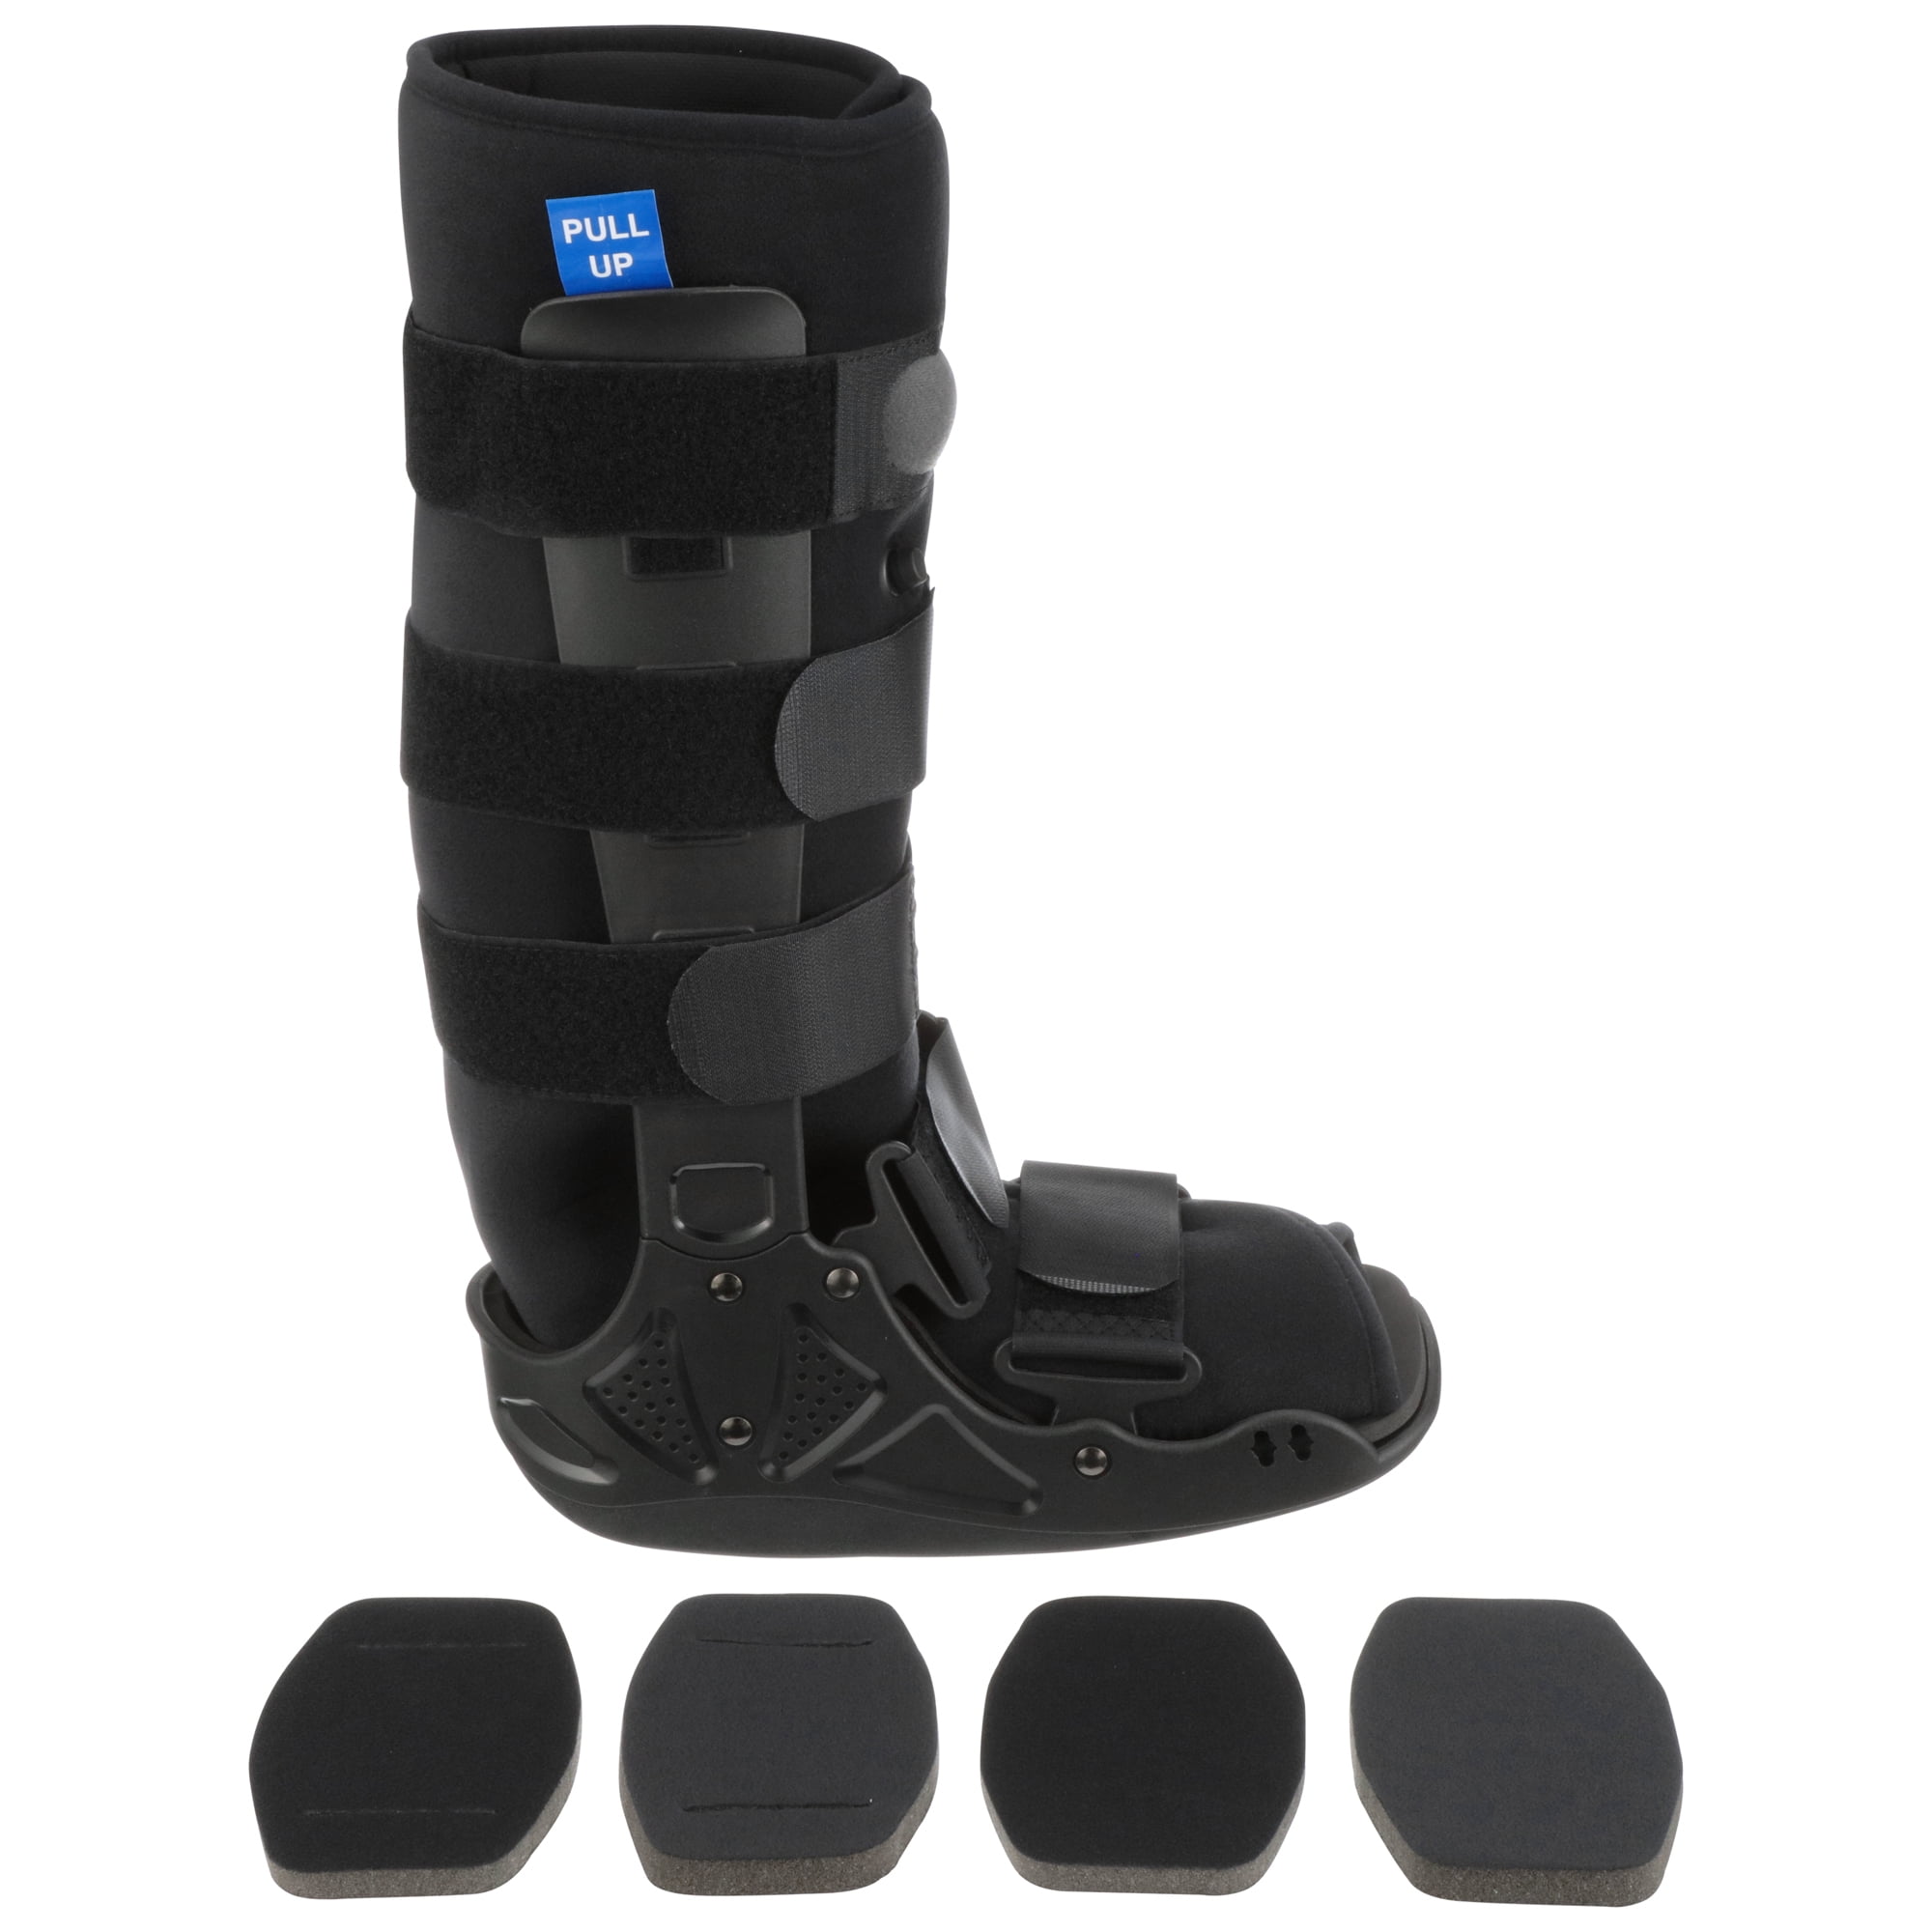 McKesson Pneumatic Walking Boot for Ankle Sprain/Leg Injury - Left or Right  Foot, Size Large, 1 Ct 